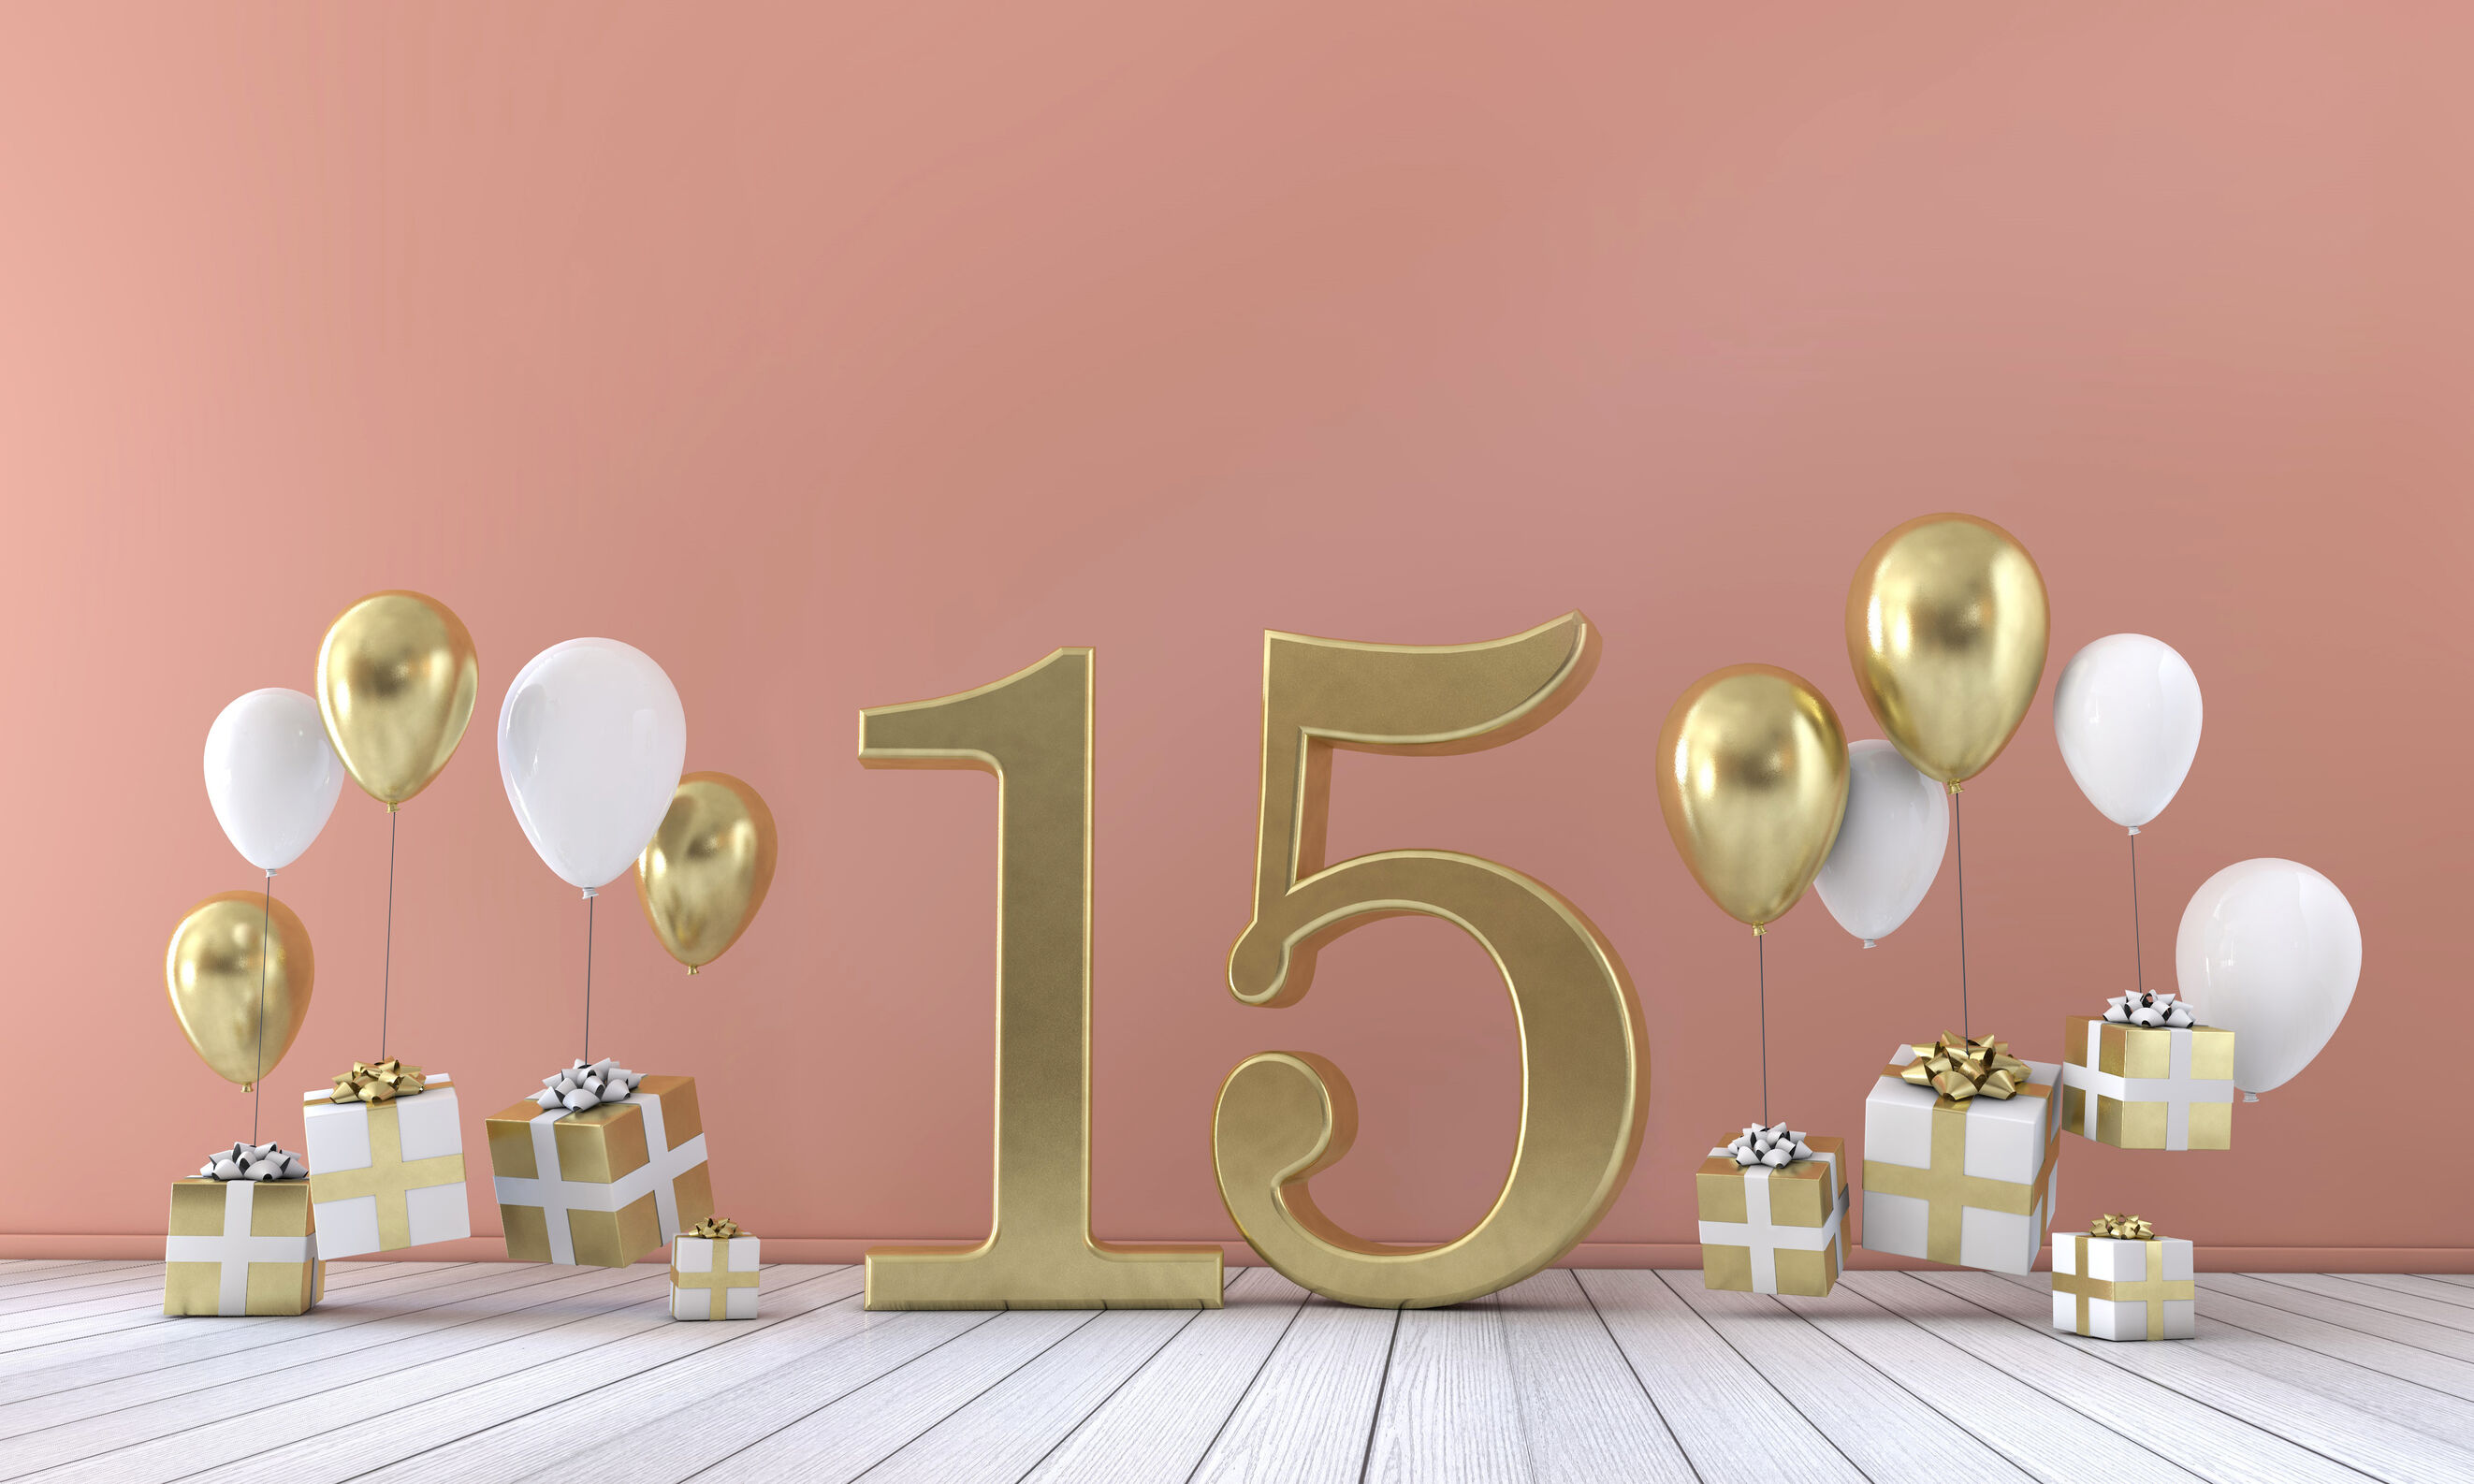 15 facts about number 15 | OpenLearn - Open University